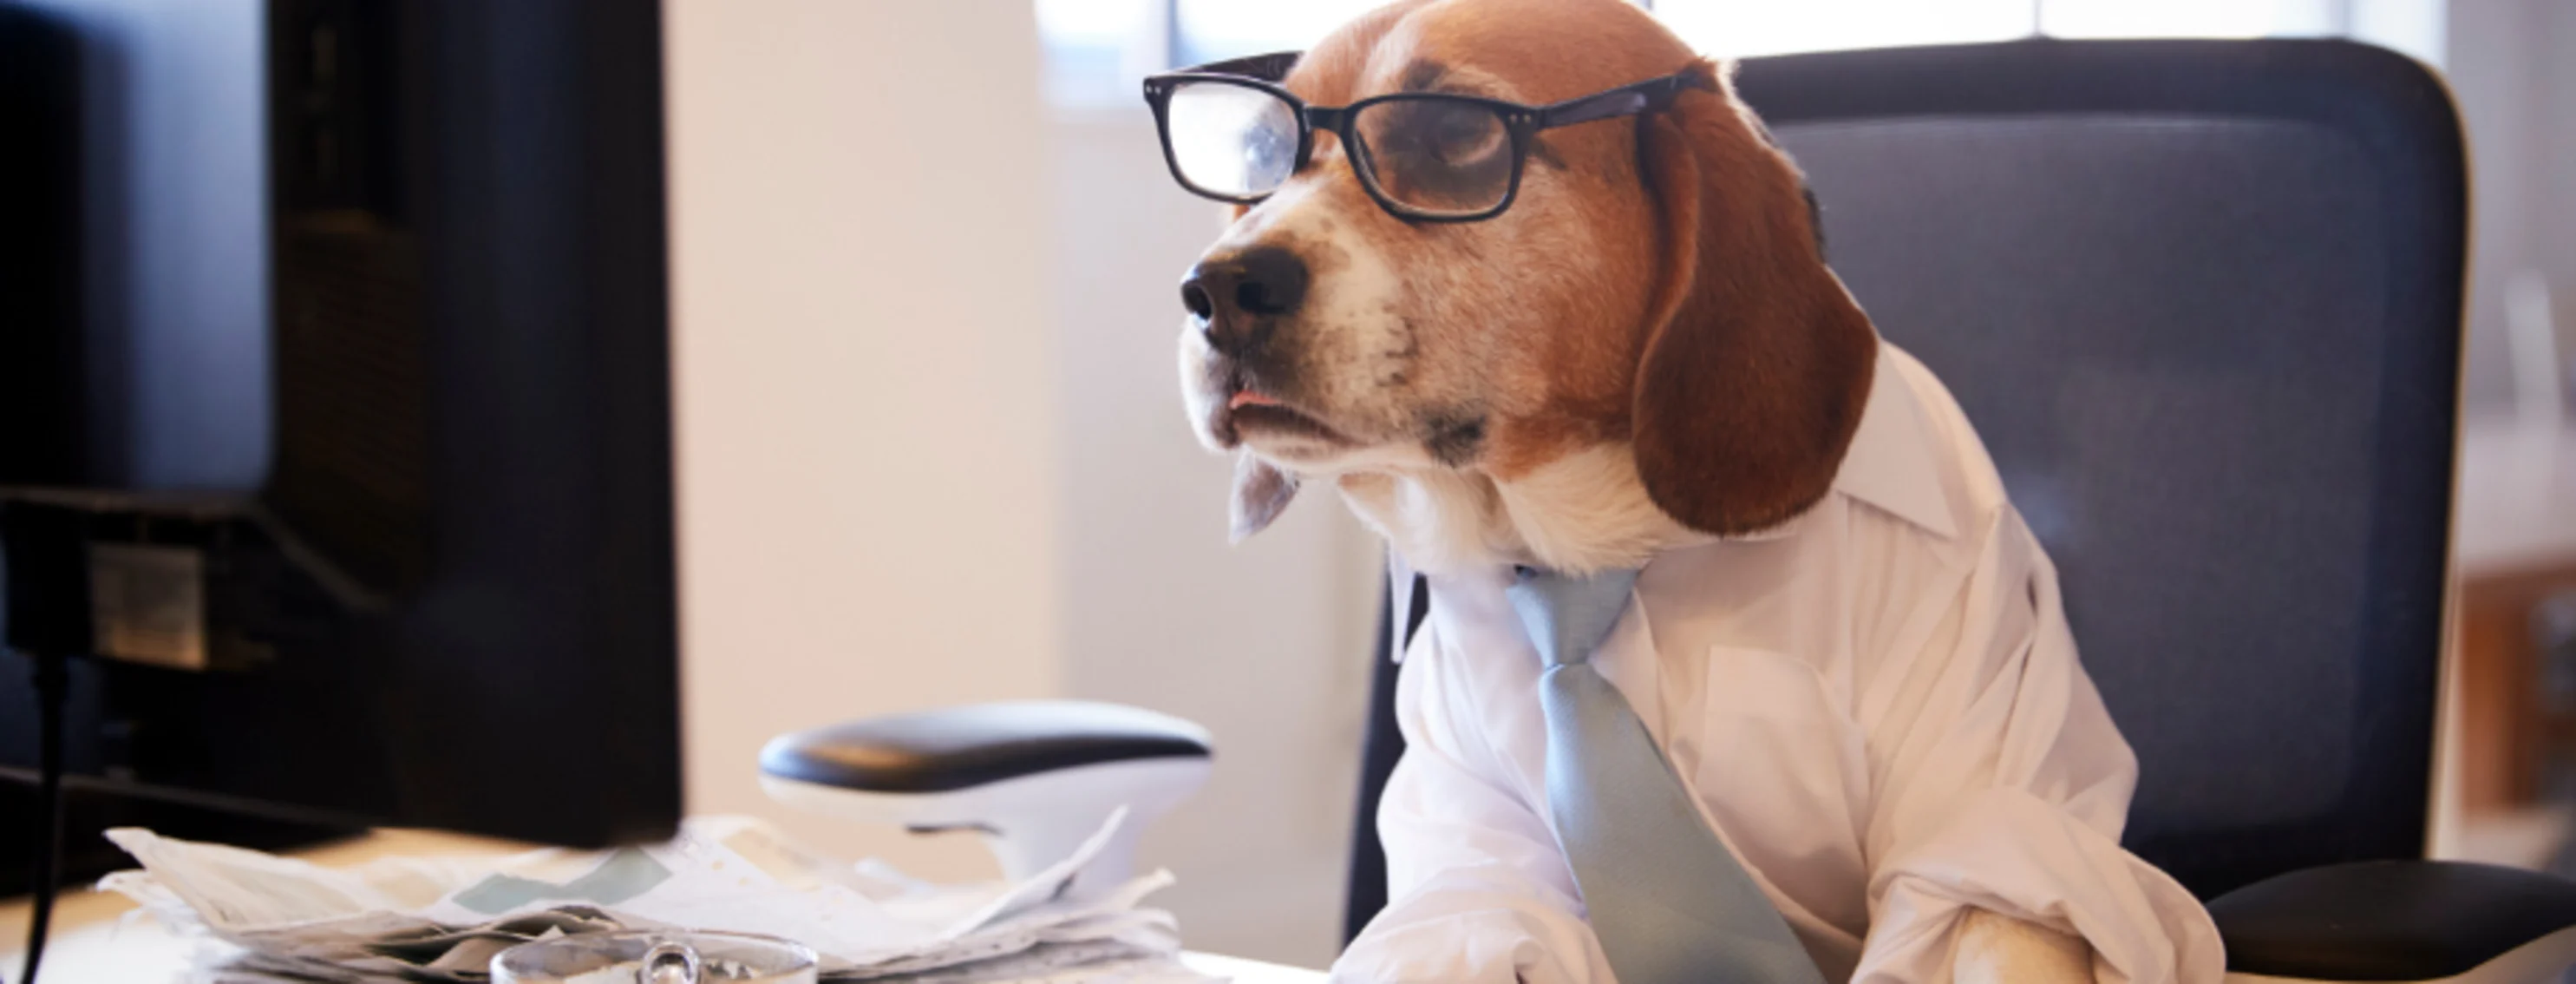 Dog Wearing Glasses Using a Computer